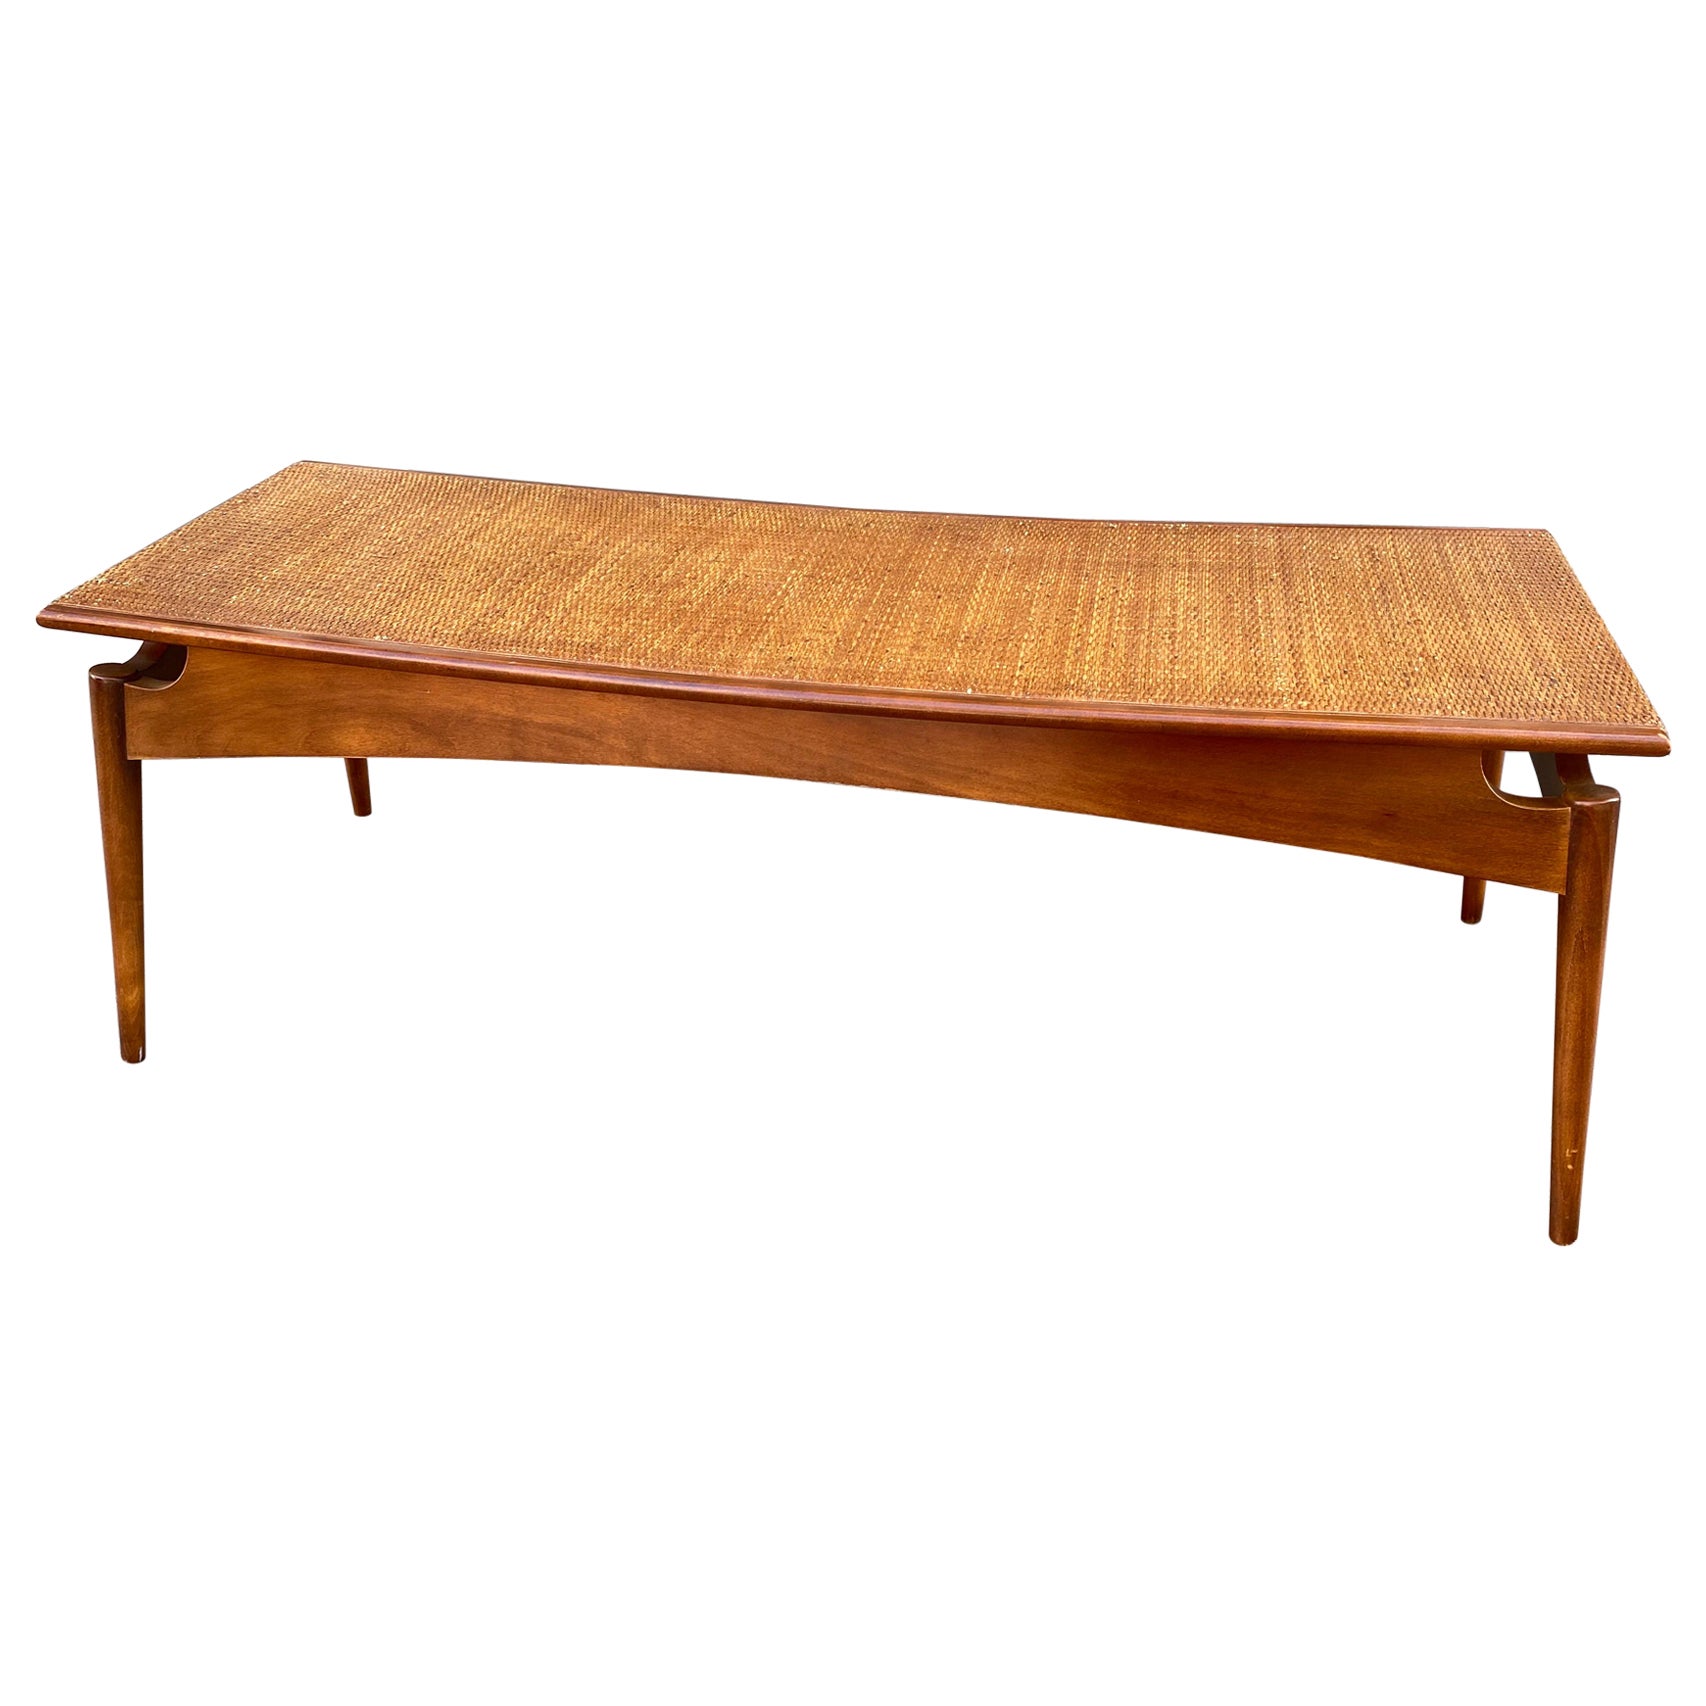 Baker Furniture Bench with Caned Seat